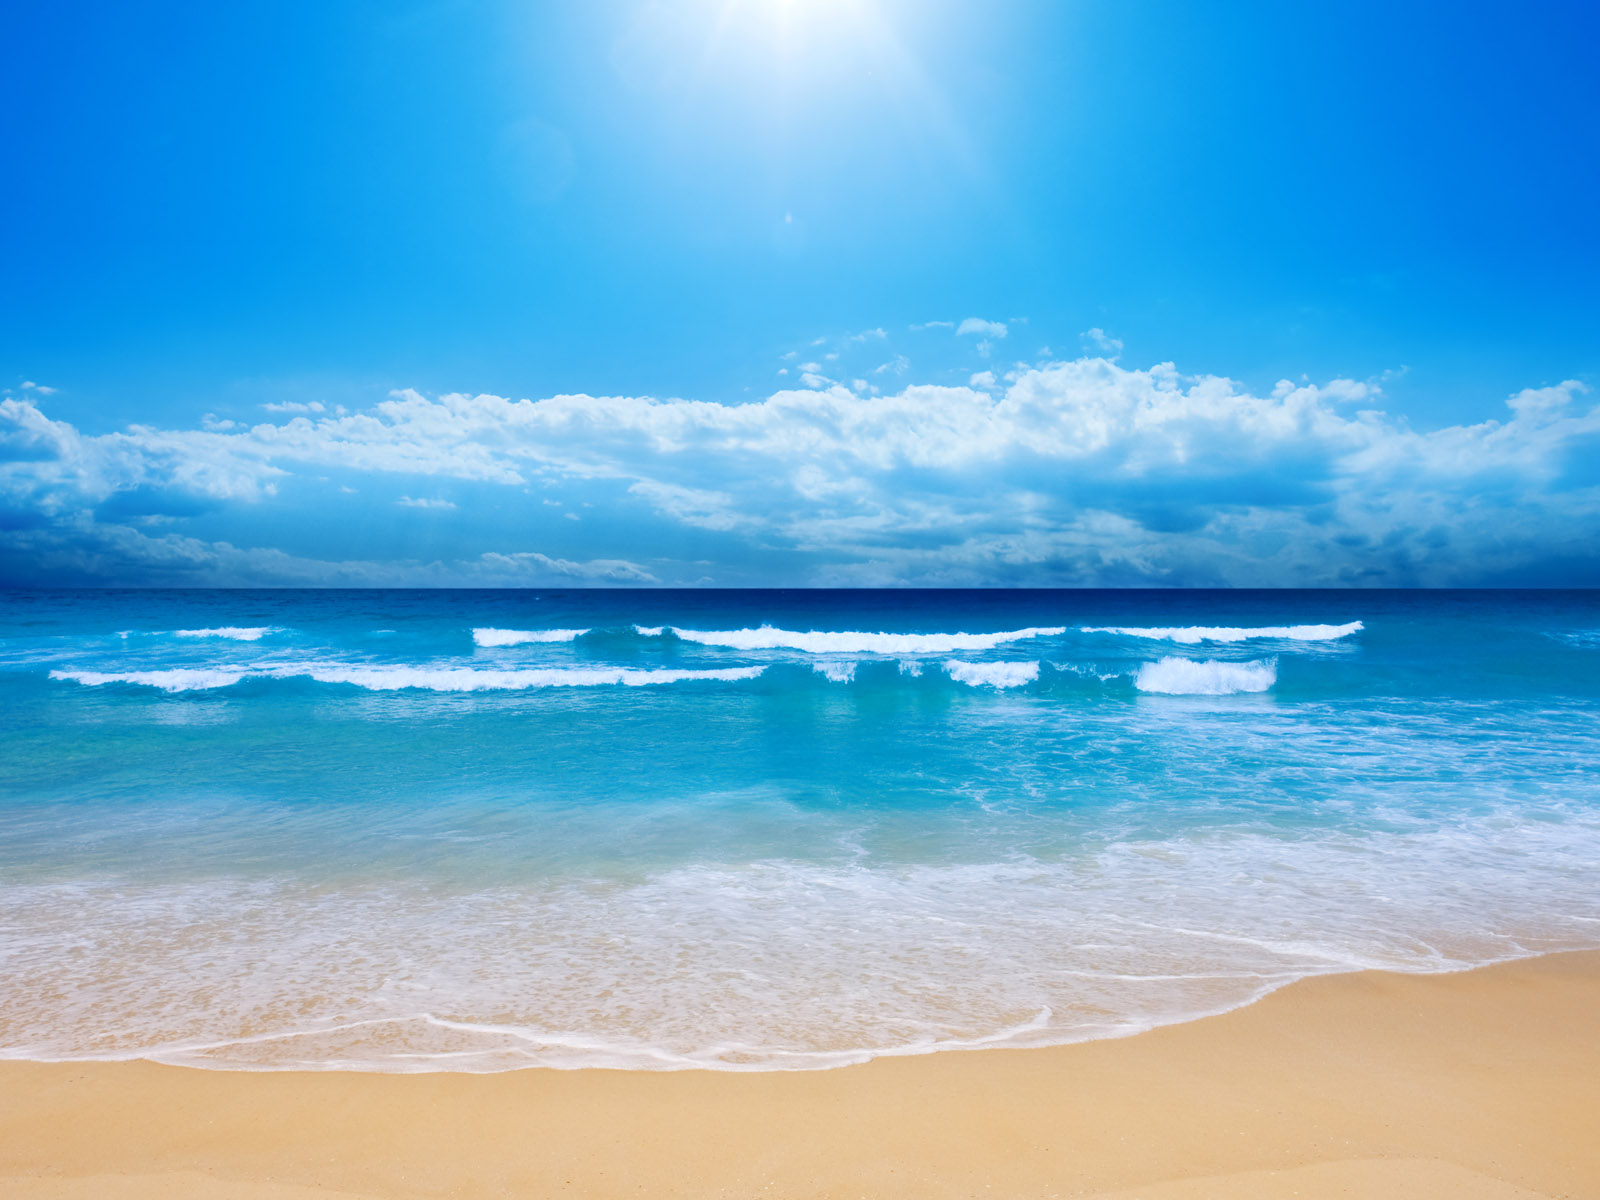 A Place For Free HD Wallpapers | Desktop Wallpapers: Beach wallpapers